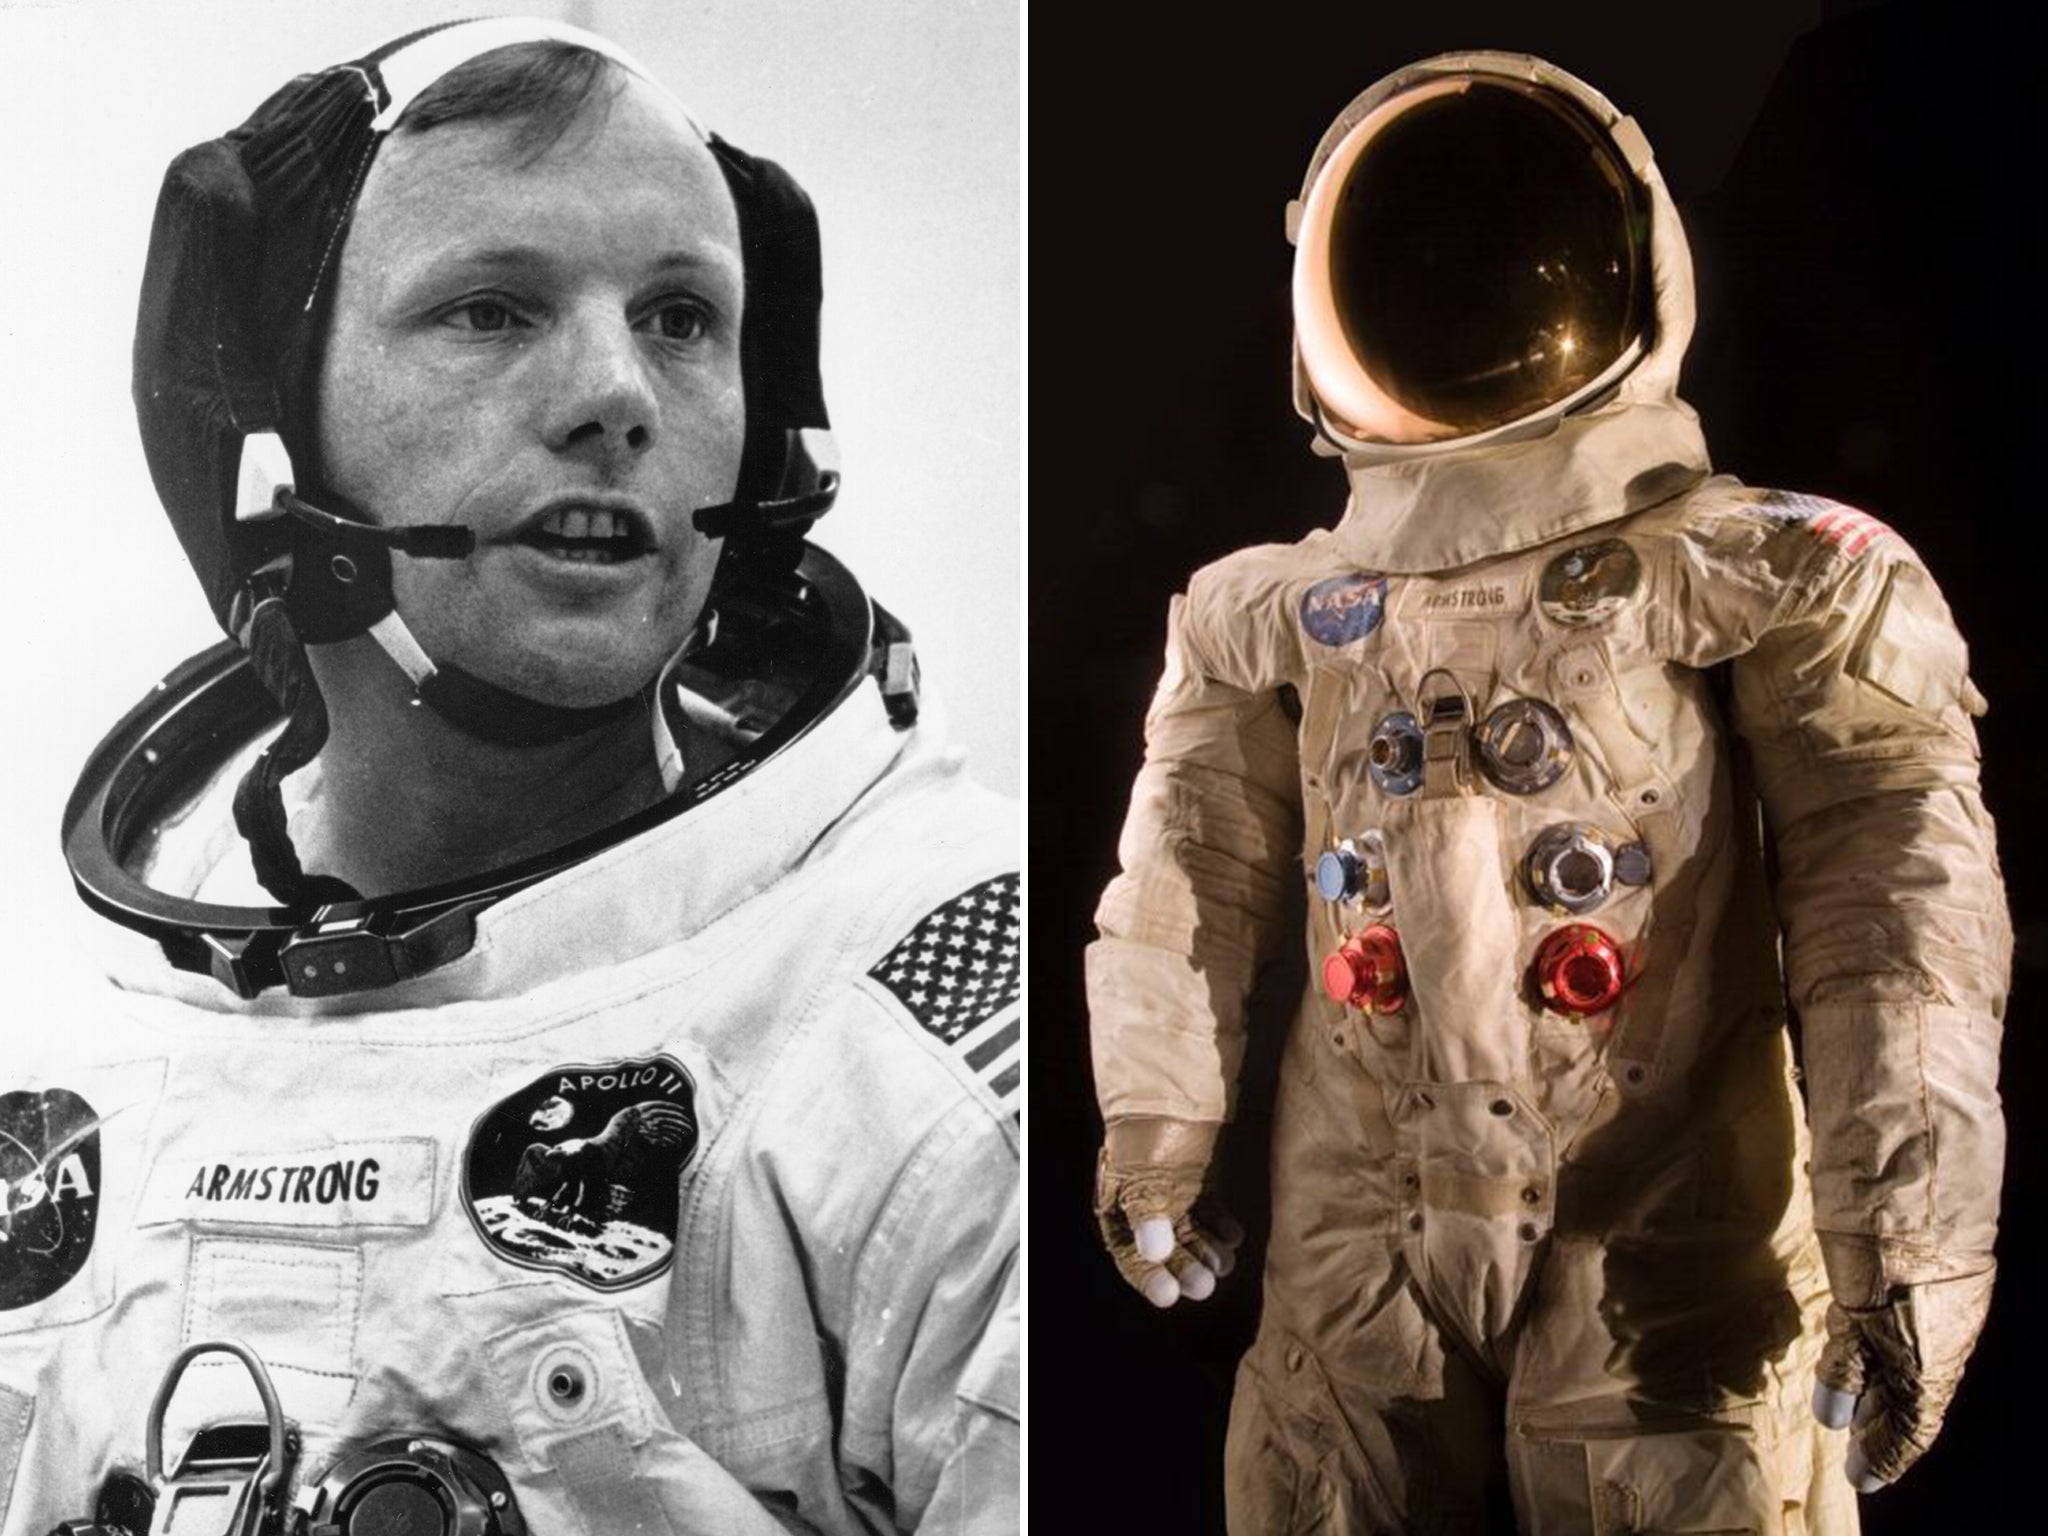 Neil Armstrong was the first man to walk on the moon